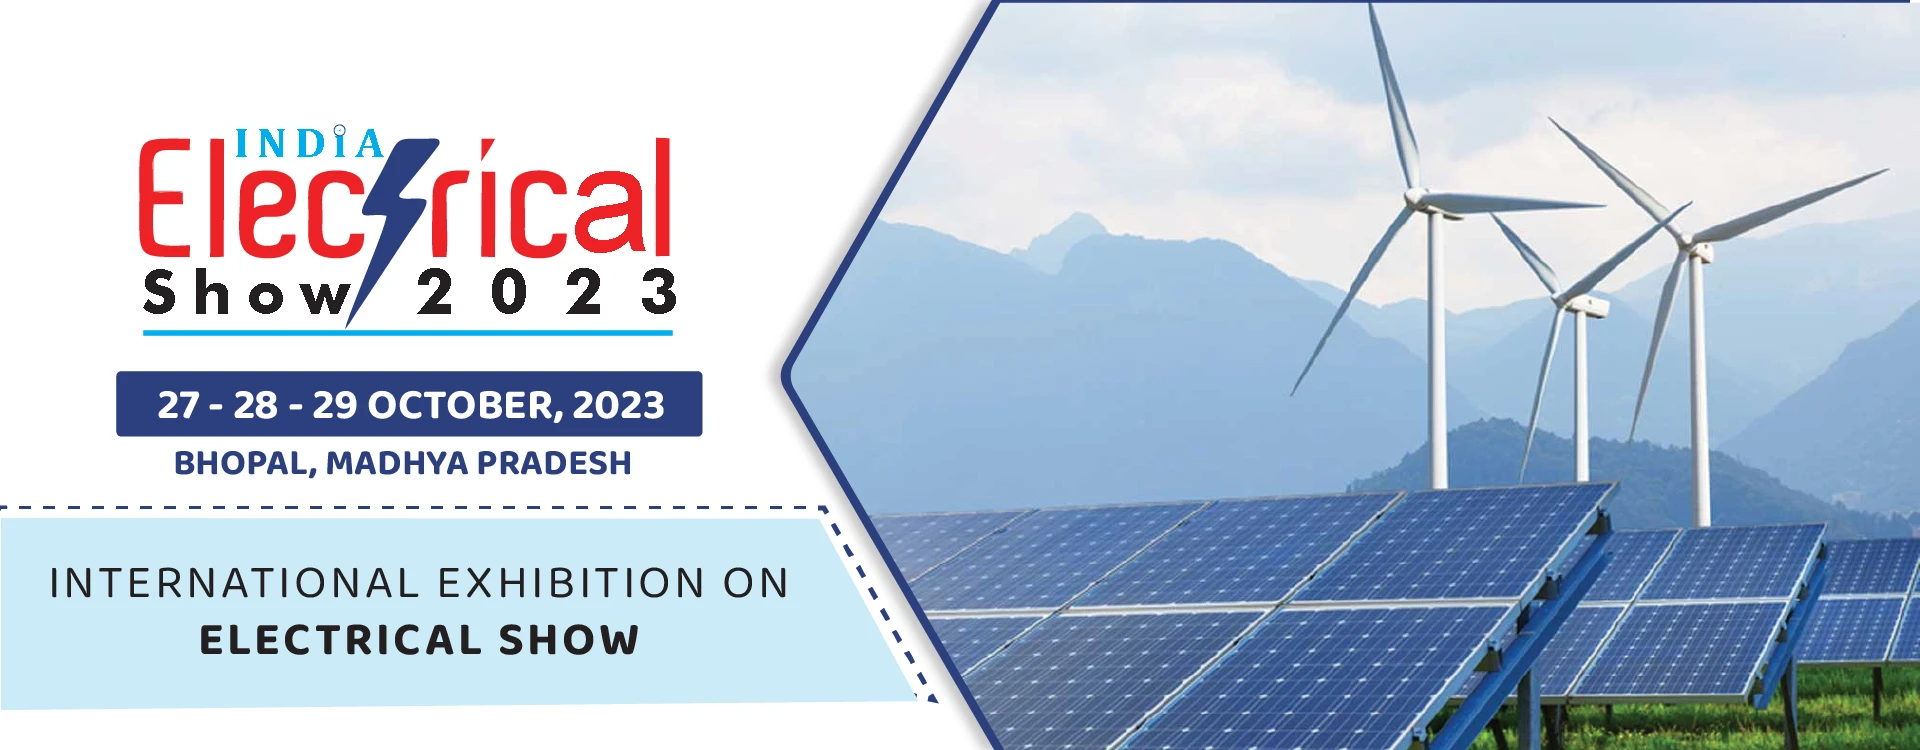 India Electrical show 2023